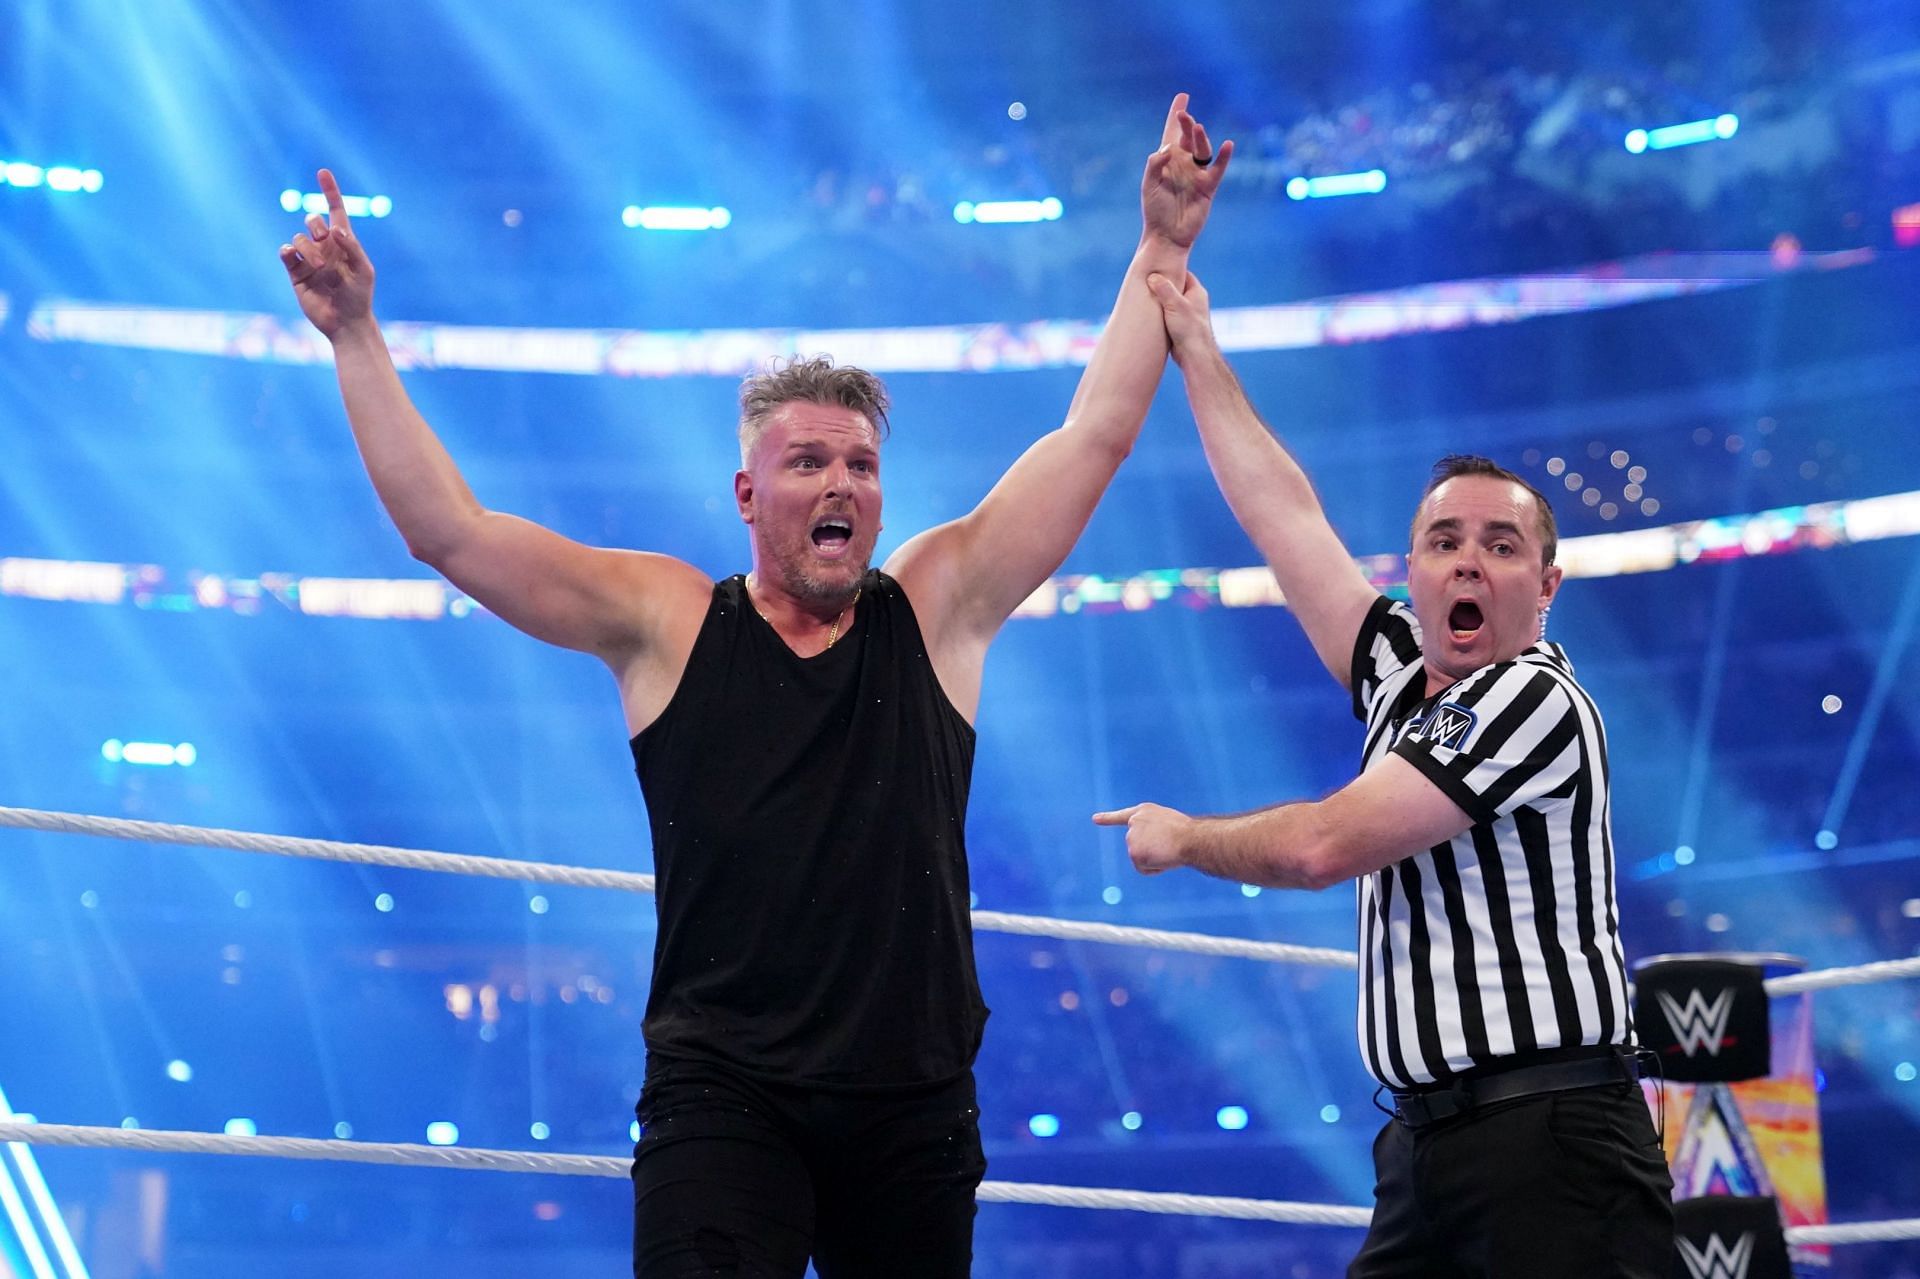 The SmackDown commentator stole the show at WrestleMania 38